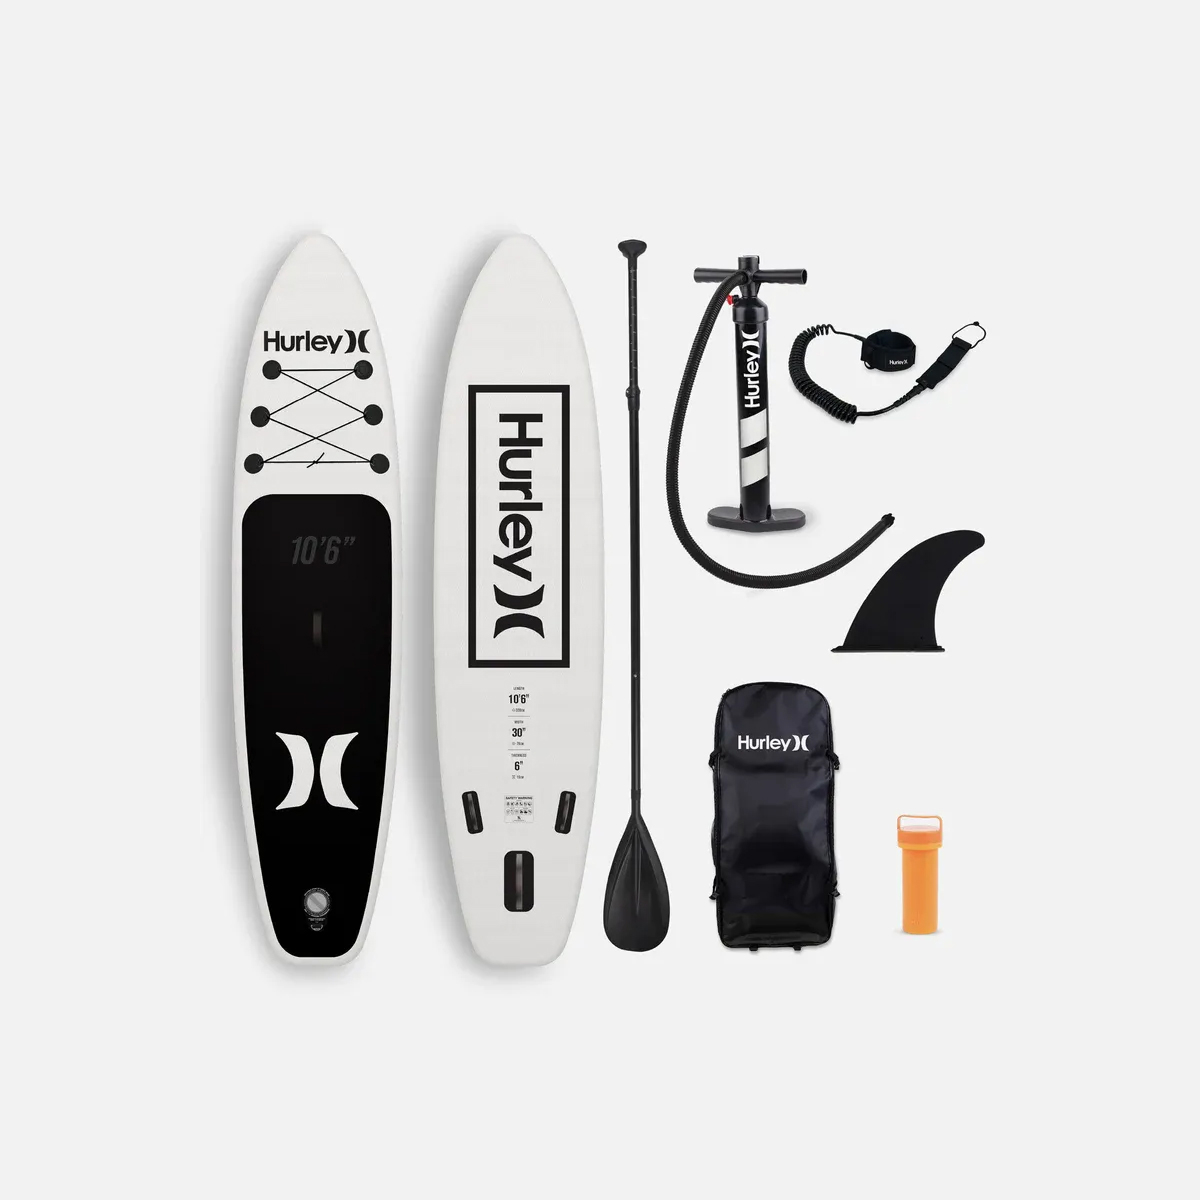 Hurley One and Only 10"6" Inflatable Stand Up Paddle Board